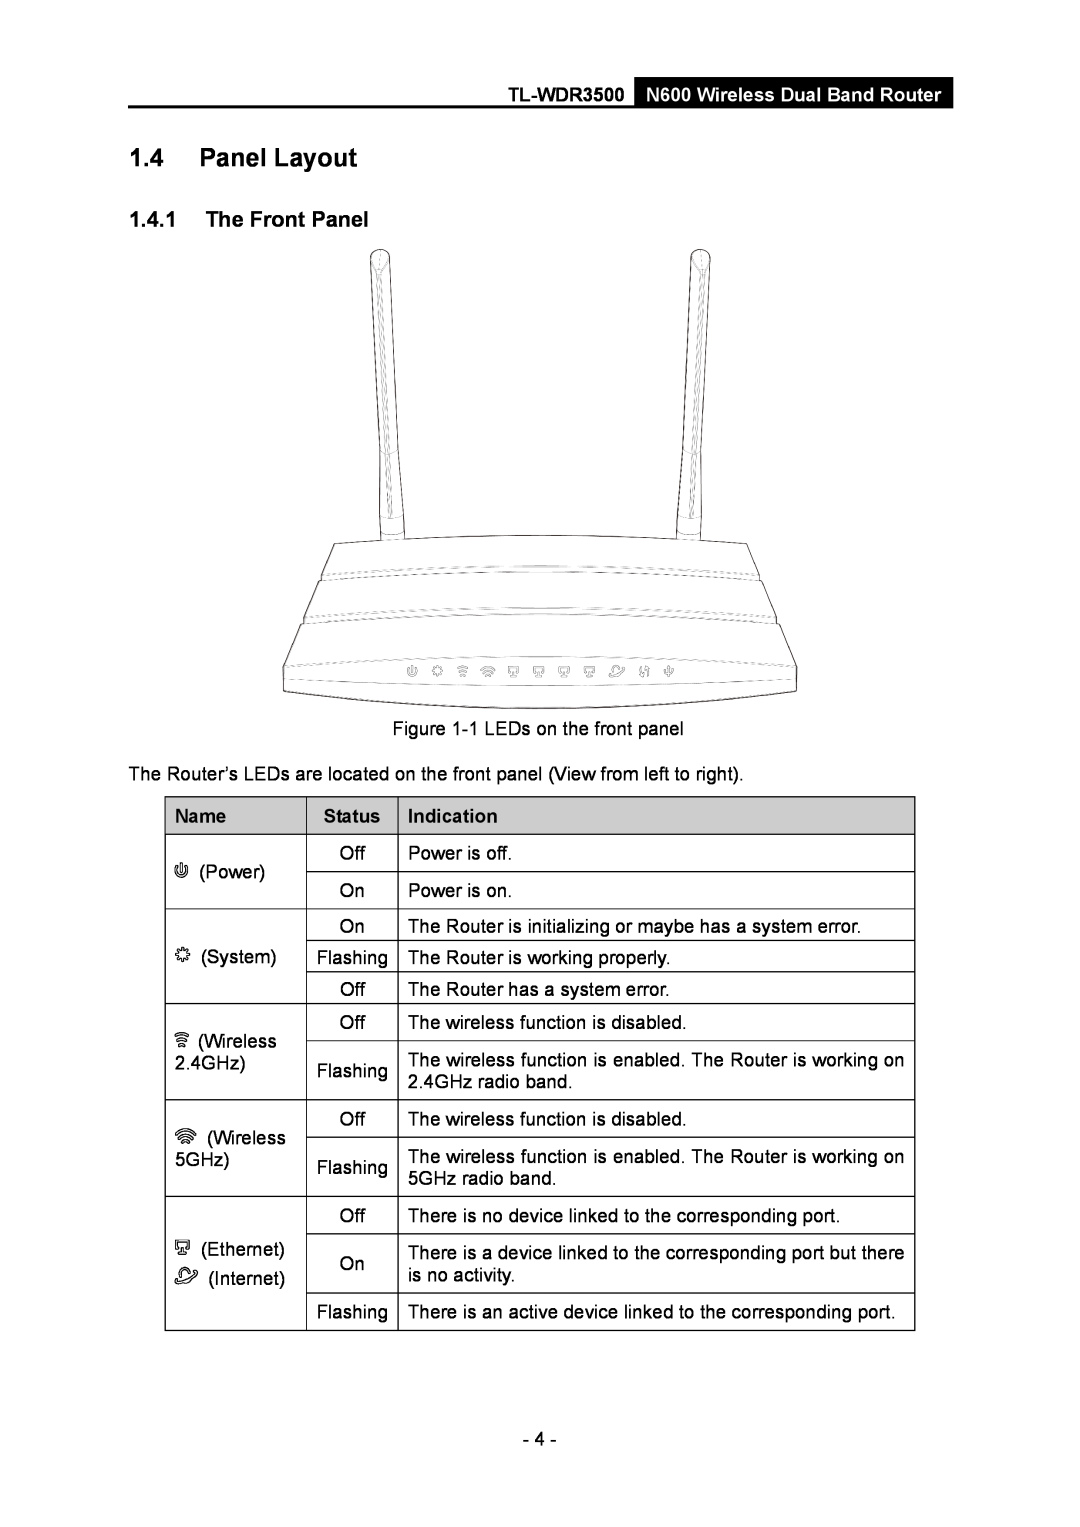 TP-Link manual Panel Layout, The Front Panel, Name, Indication, TL-WDR3500 N600 Wireless Dual Band Router 